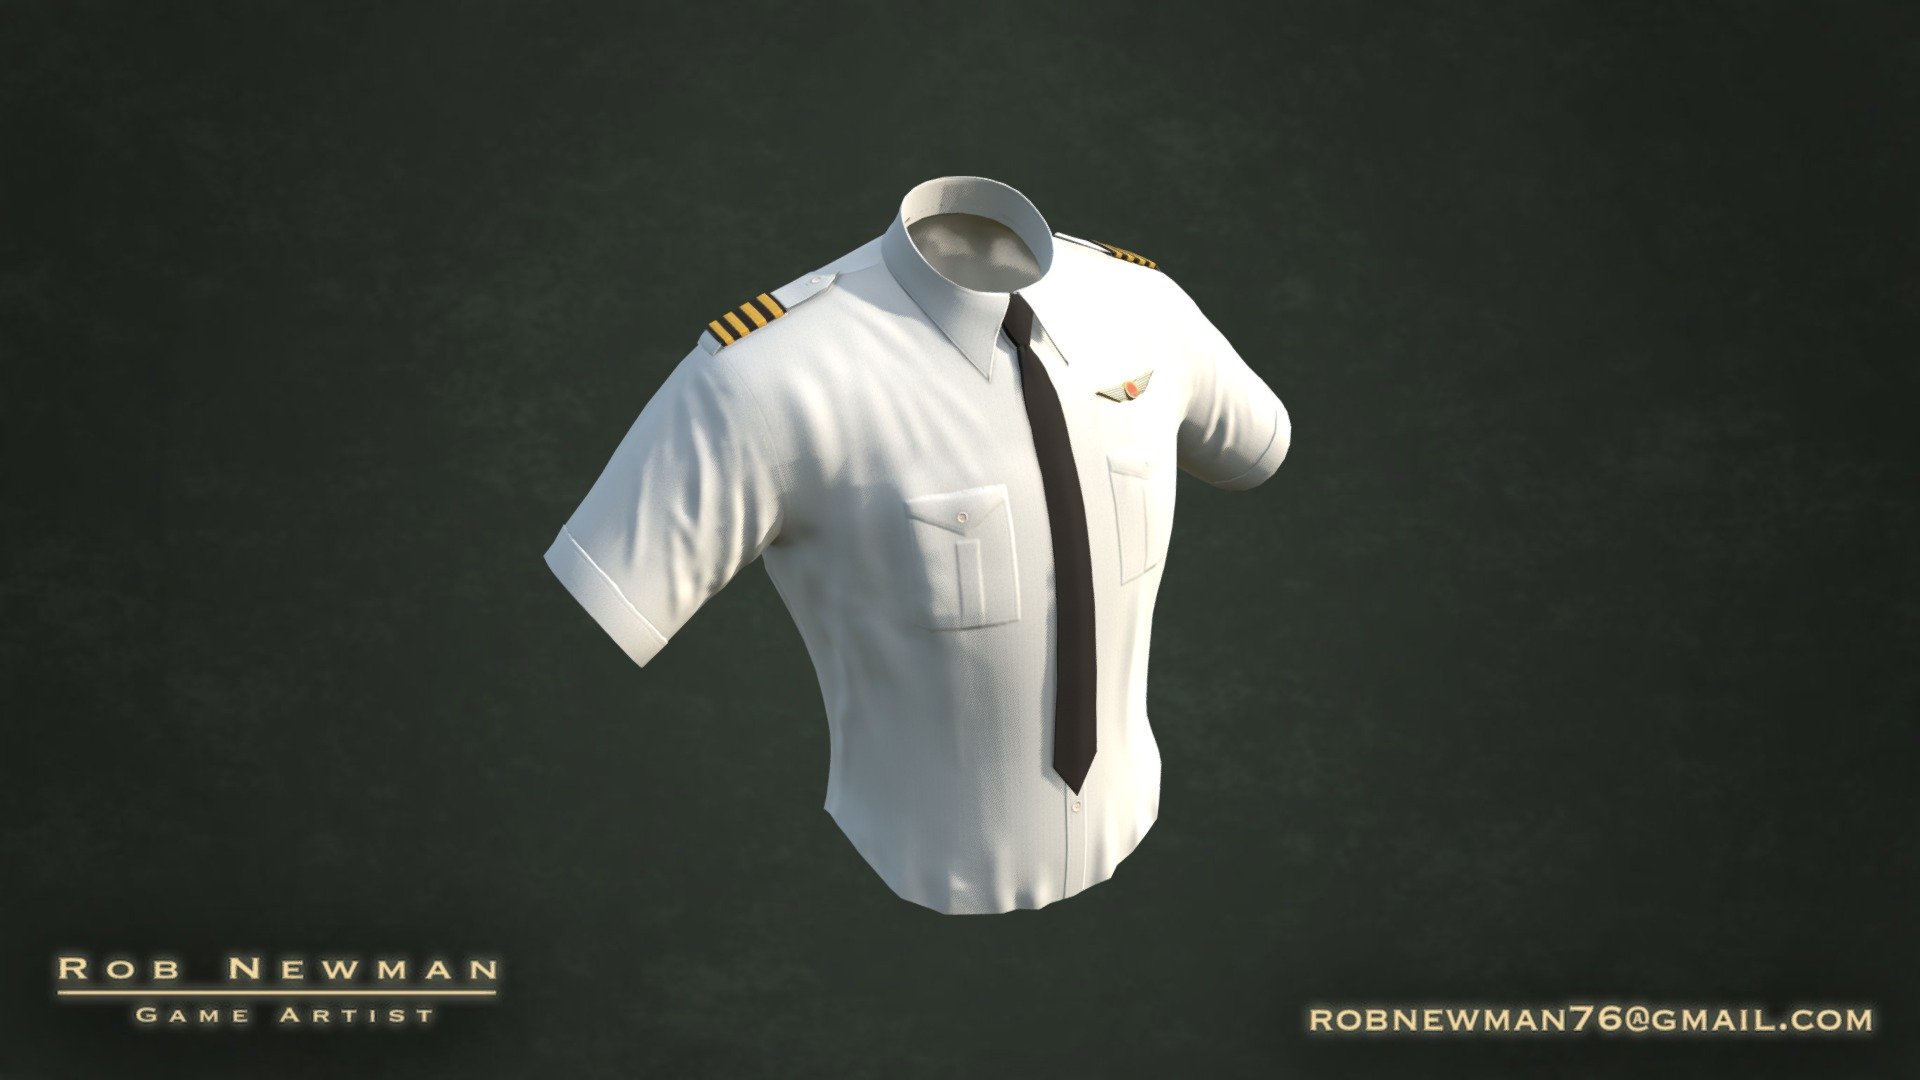 Game resolution model of a pilot shirt, for a game character. Using PBR for materials 3d model